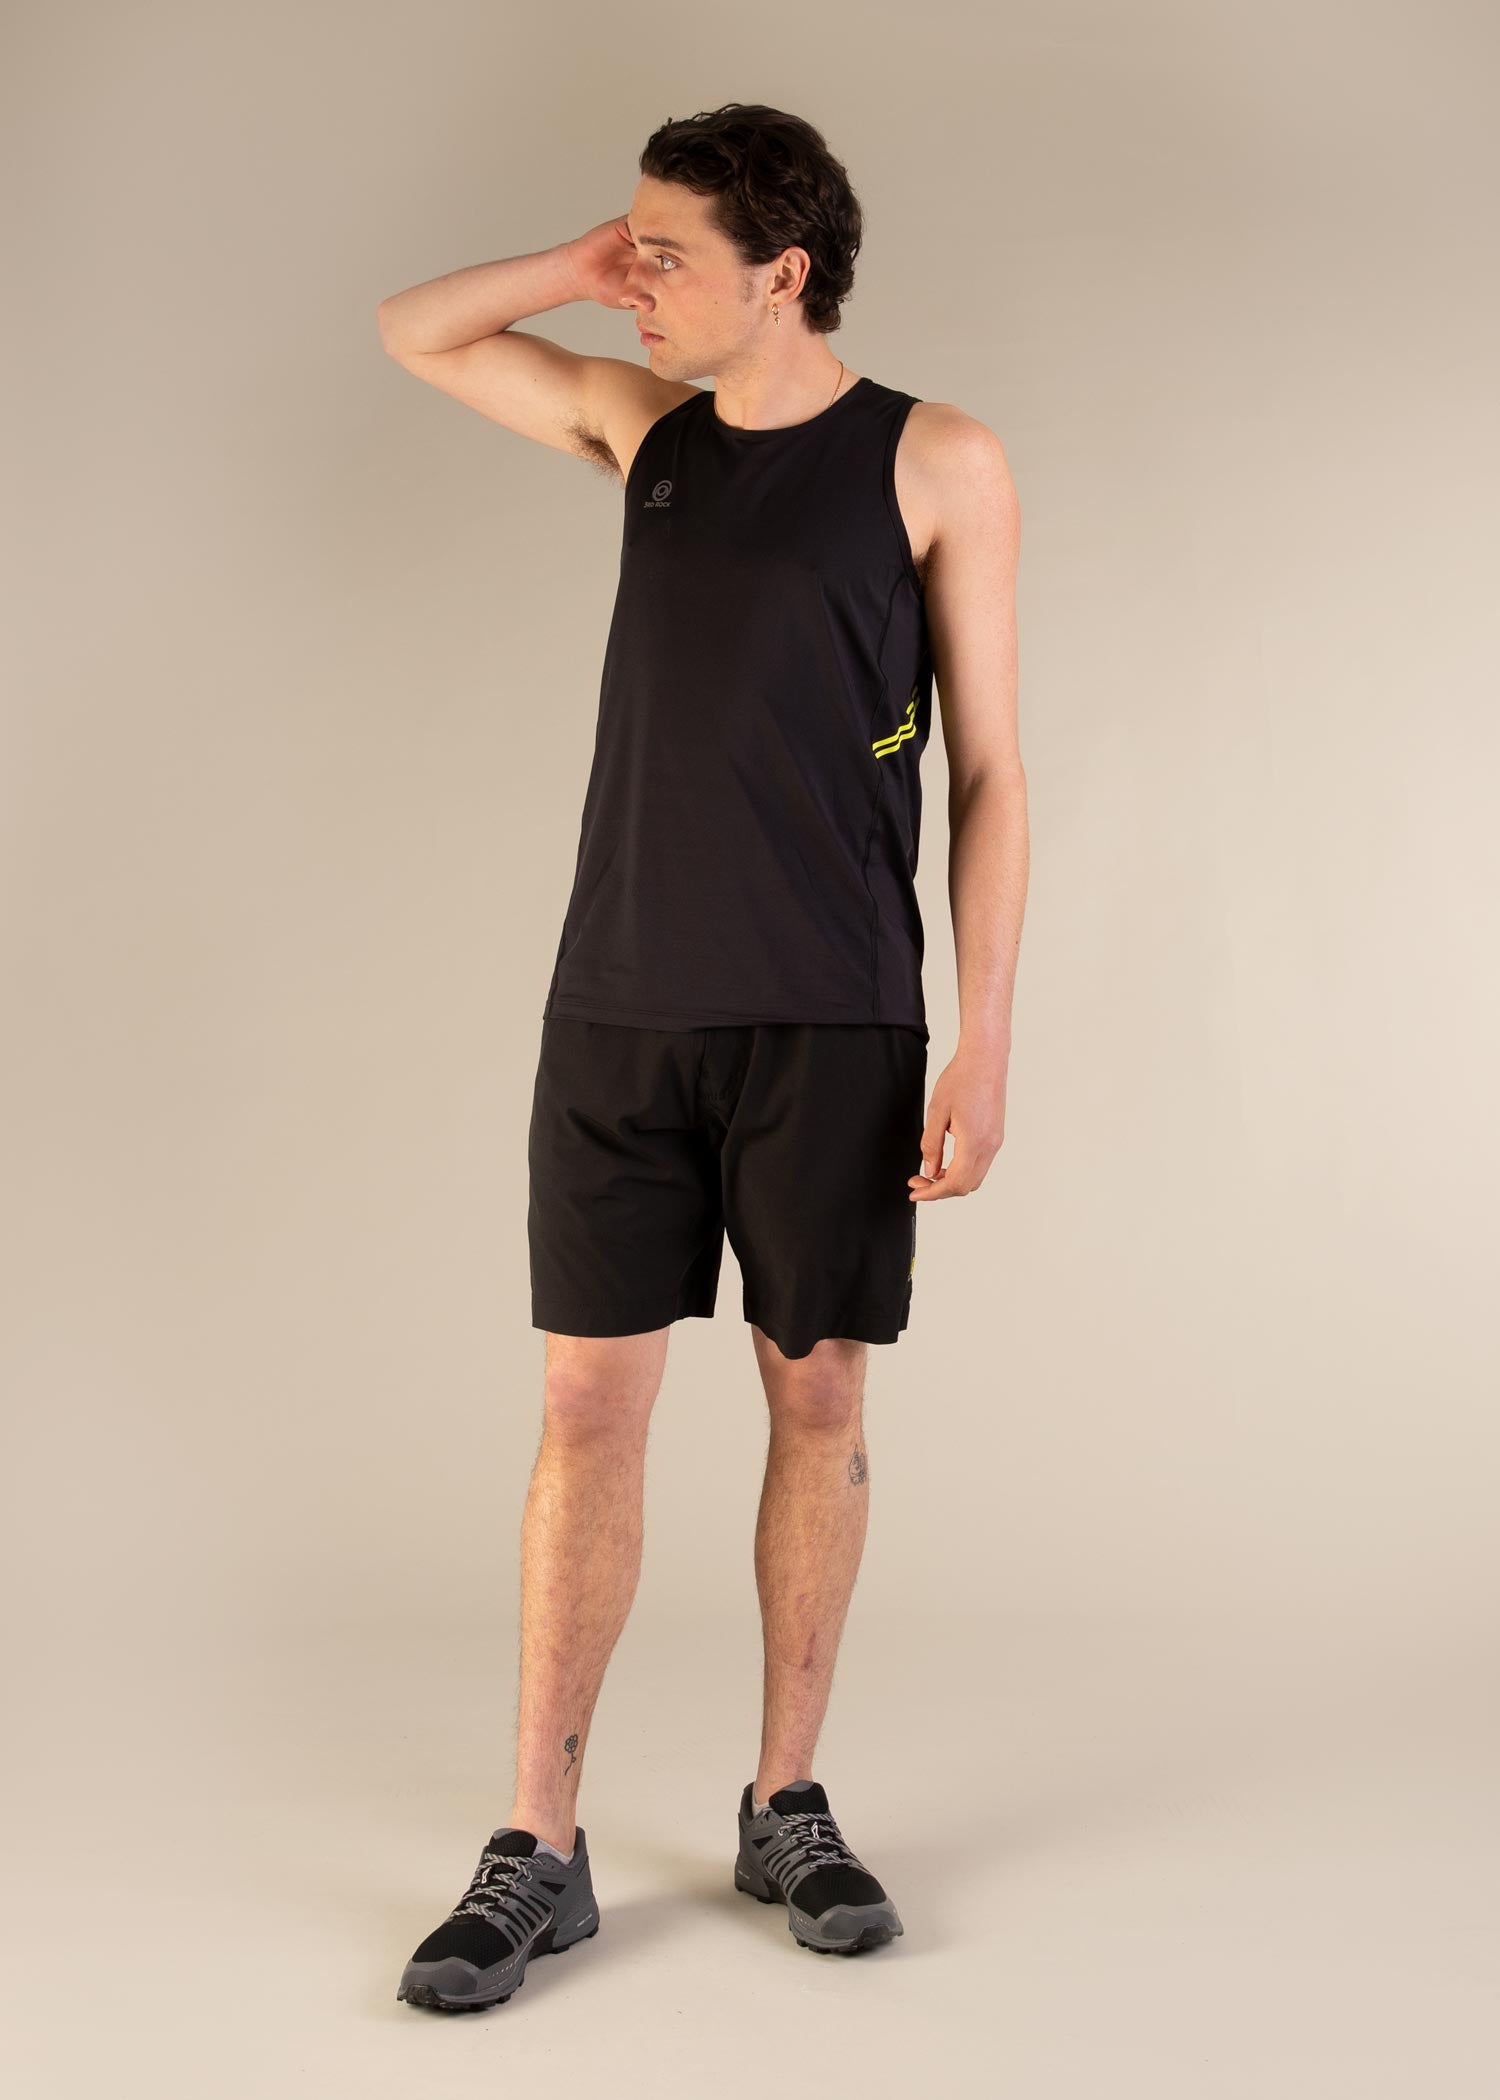 3RD ROCK Sustainable Acitvewear gym shorts - Kai is 6ft 1" with a 32" waist and is wearing a 32. M